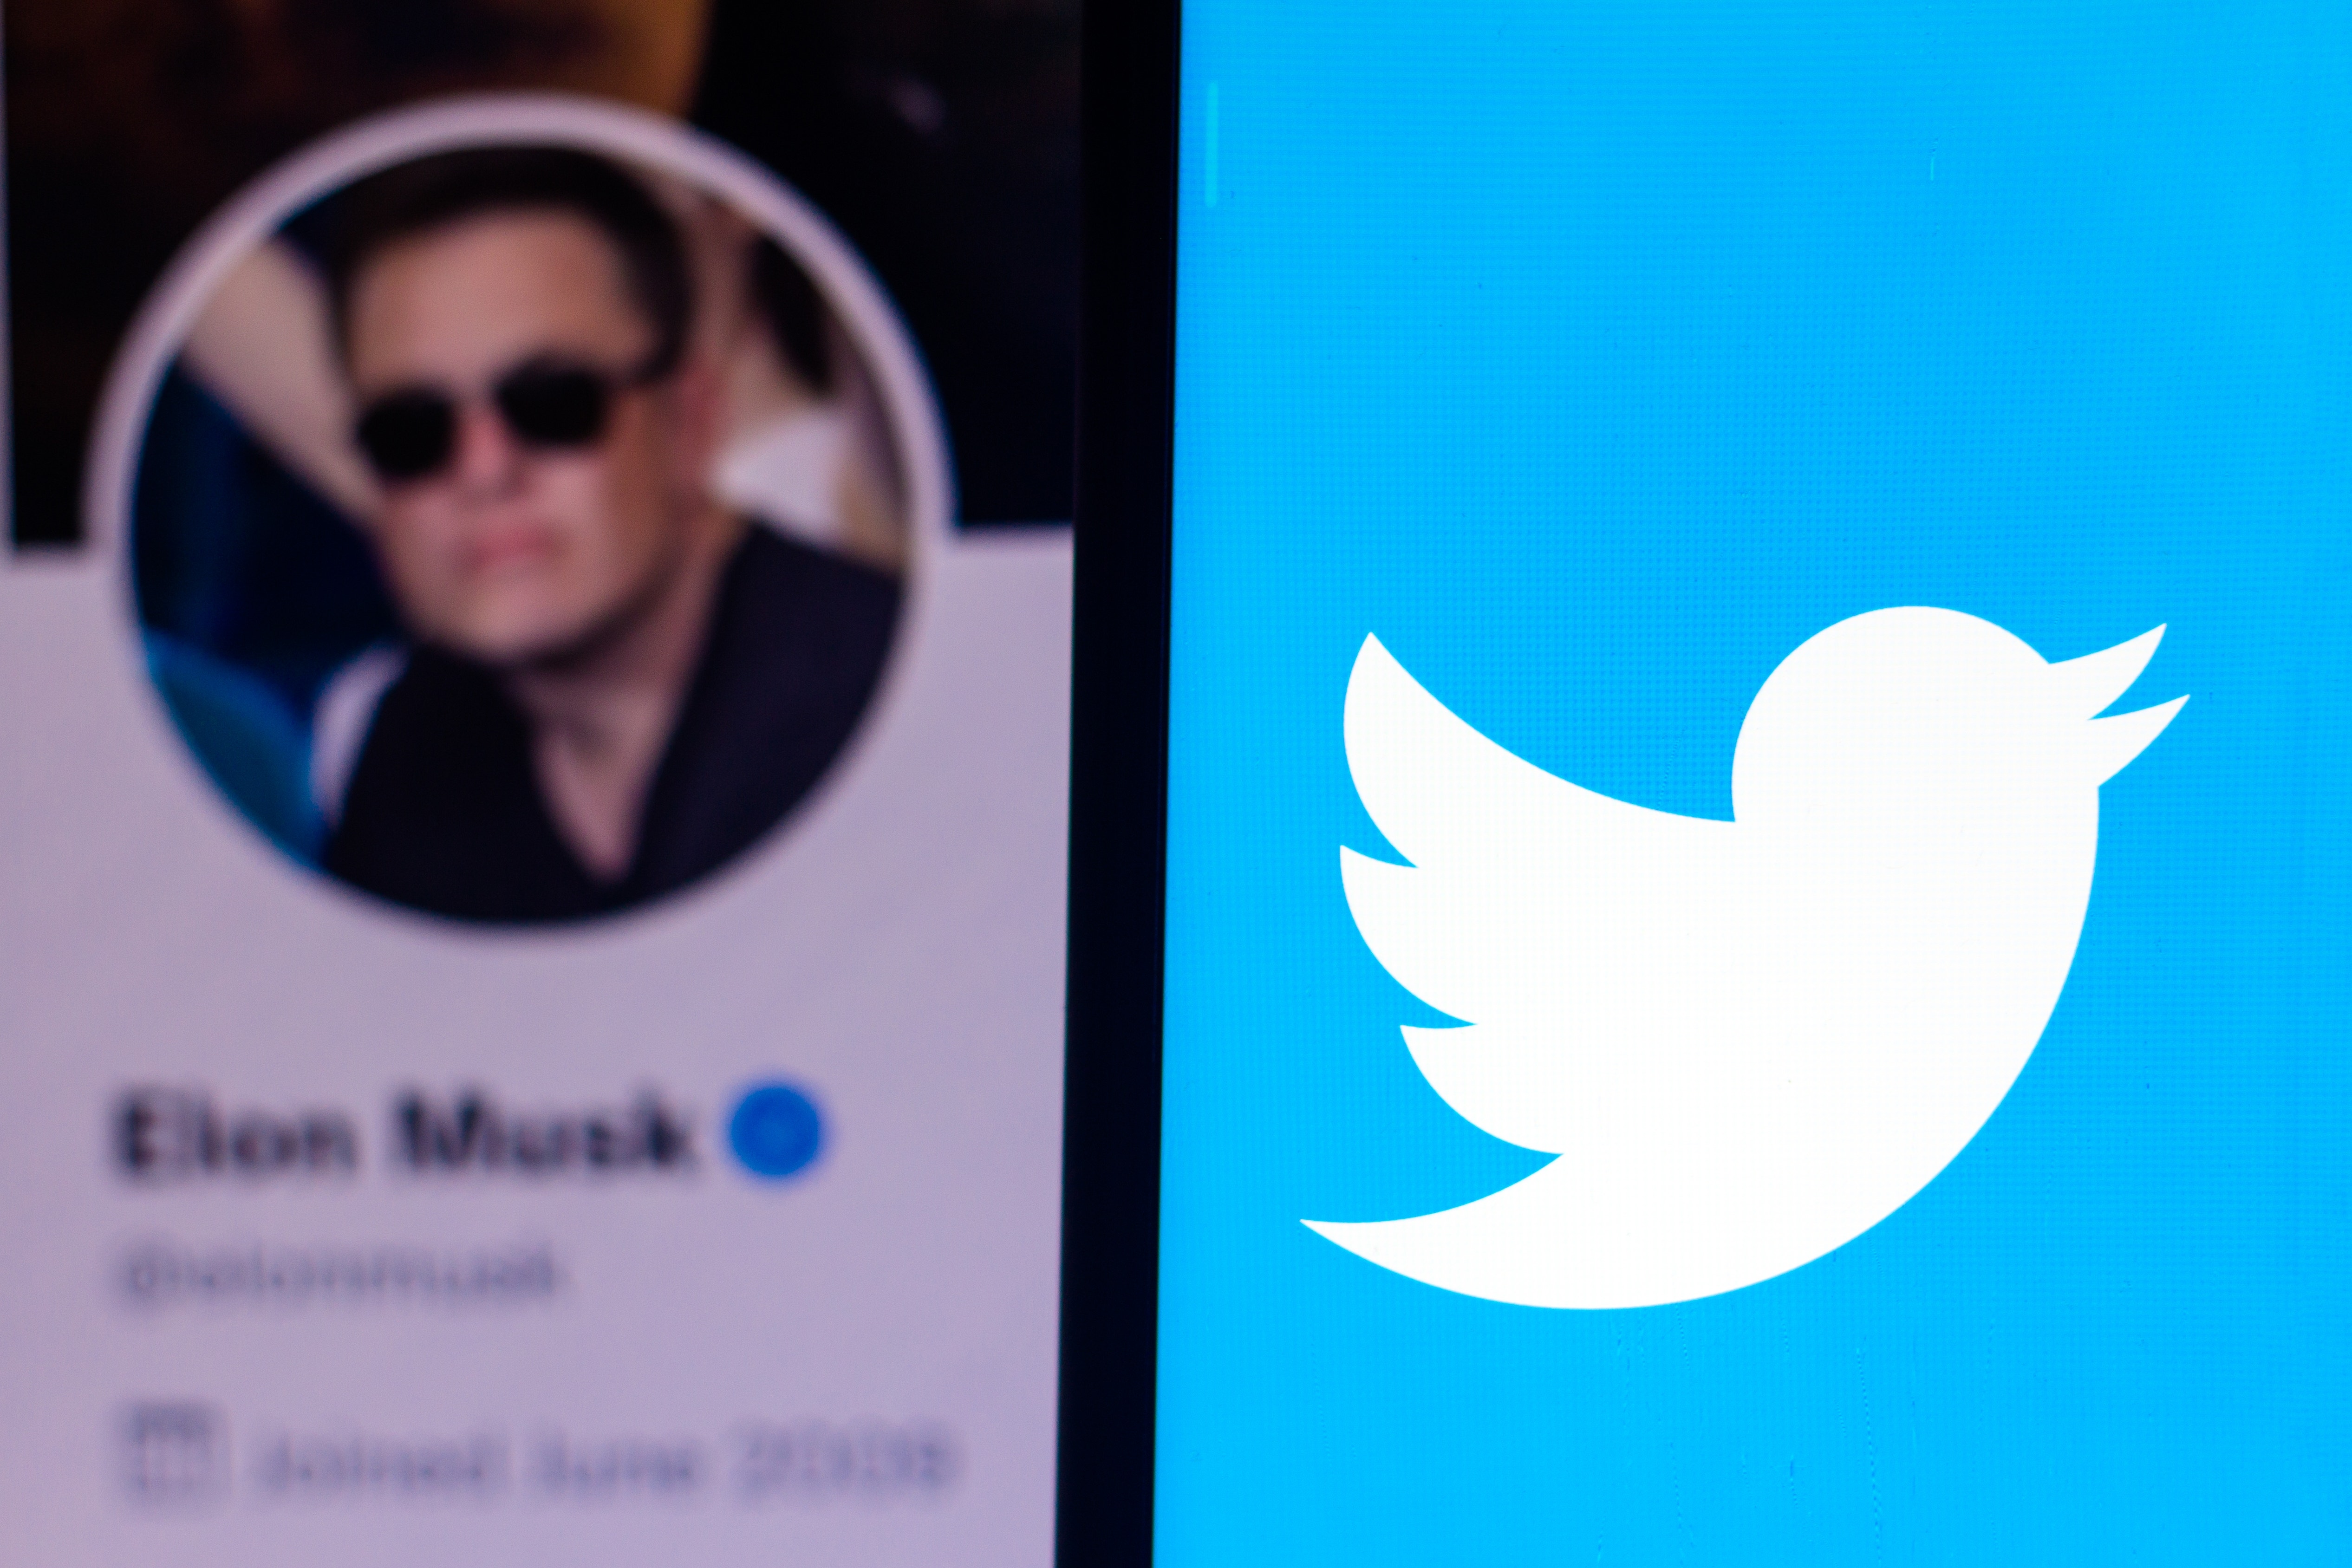 Twitter Seeks To Be More Aligned With Elon Musk On Permanent Ban Policy, But Trump Return Unlikely: Report